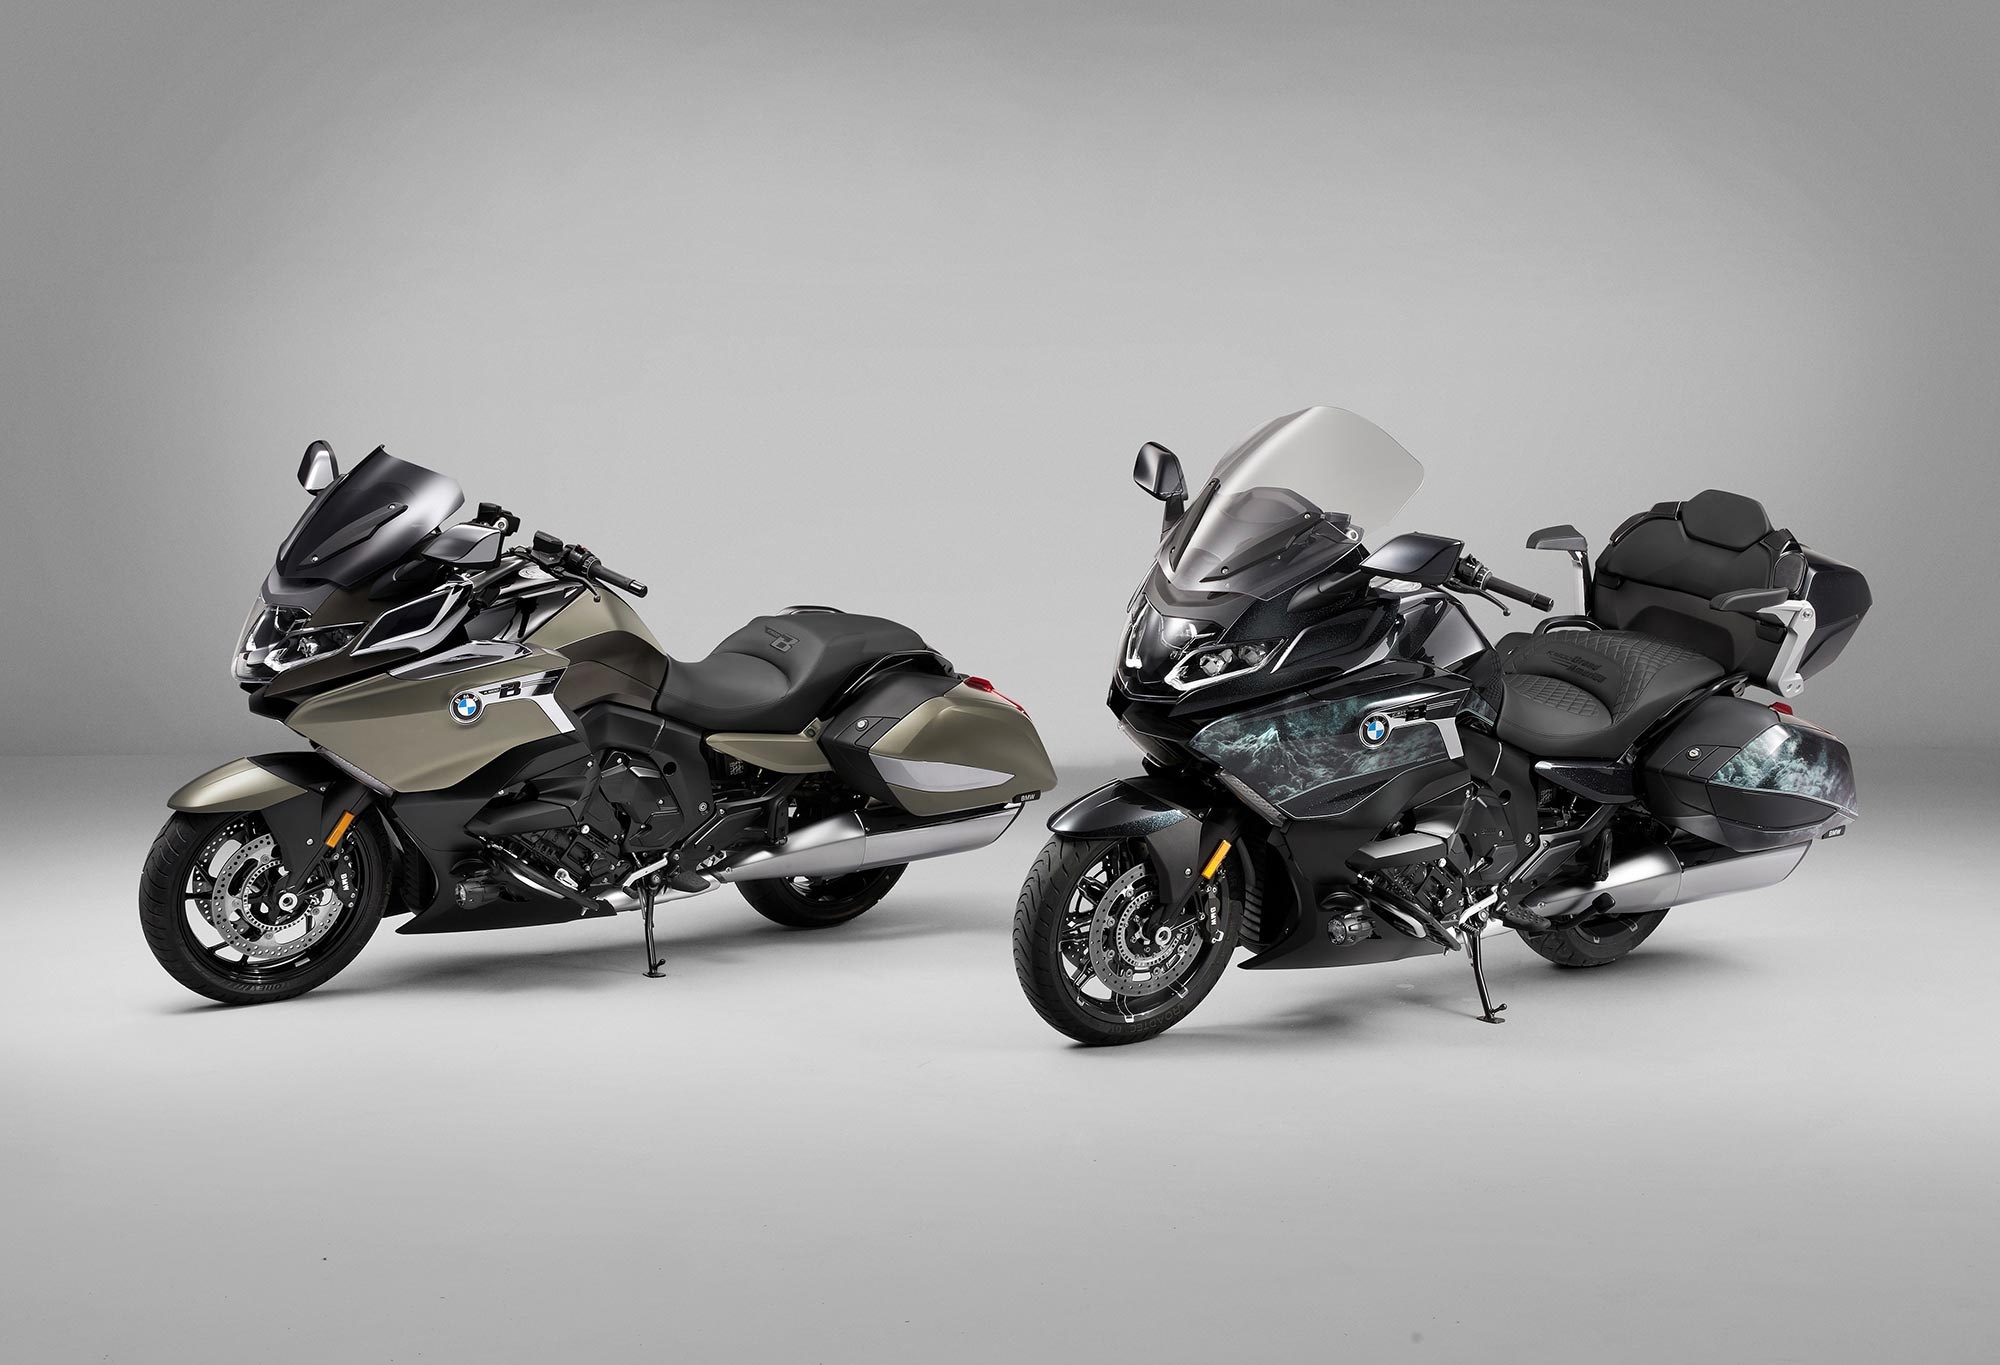 BMW K 1600 Grand America, Touring motorcycle, First look cycle world, Impressive model, 2000x1370 HD Desktop